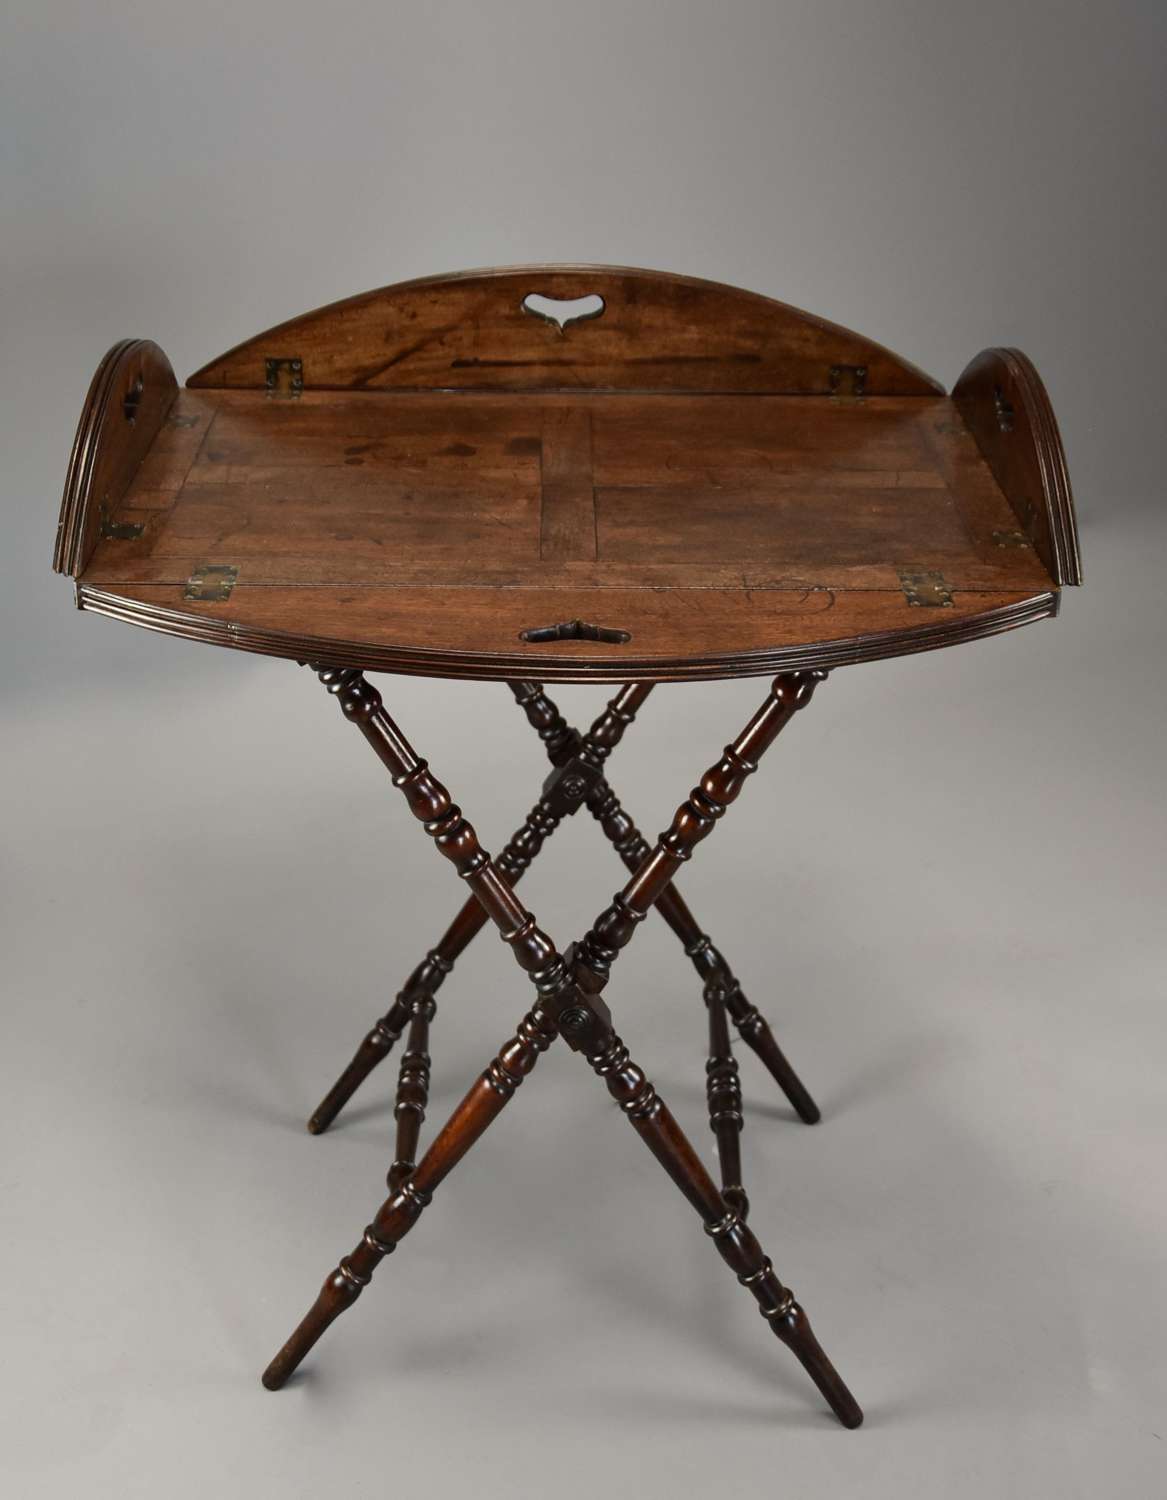 Late 18thc mahogany Butler’s tray on stand with superb original patina